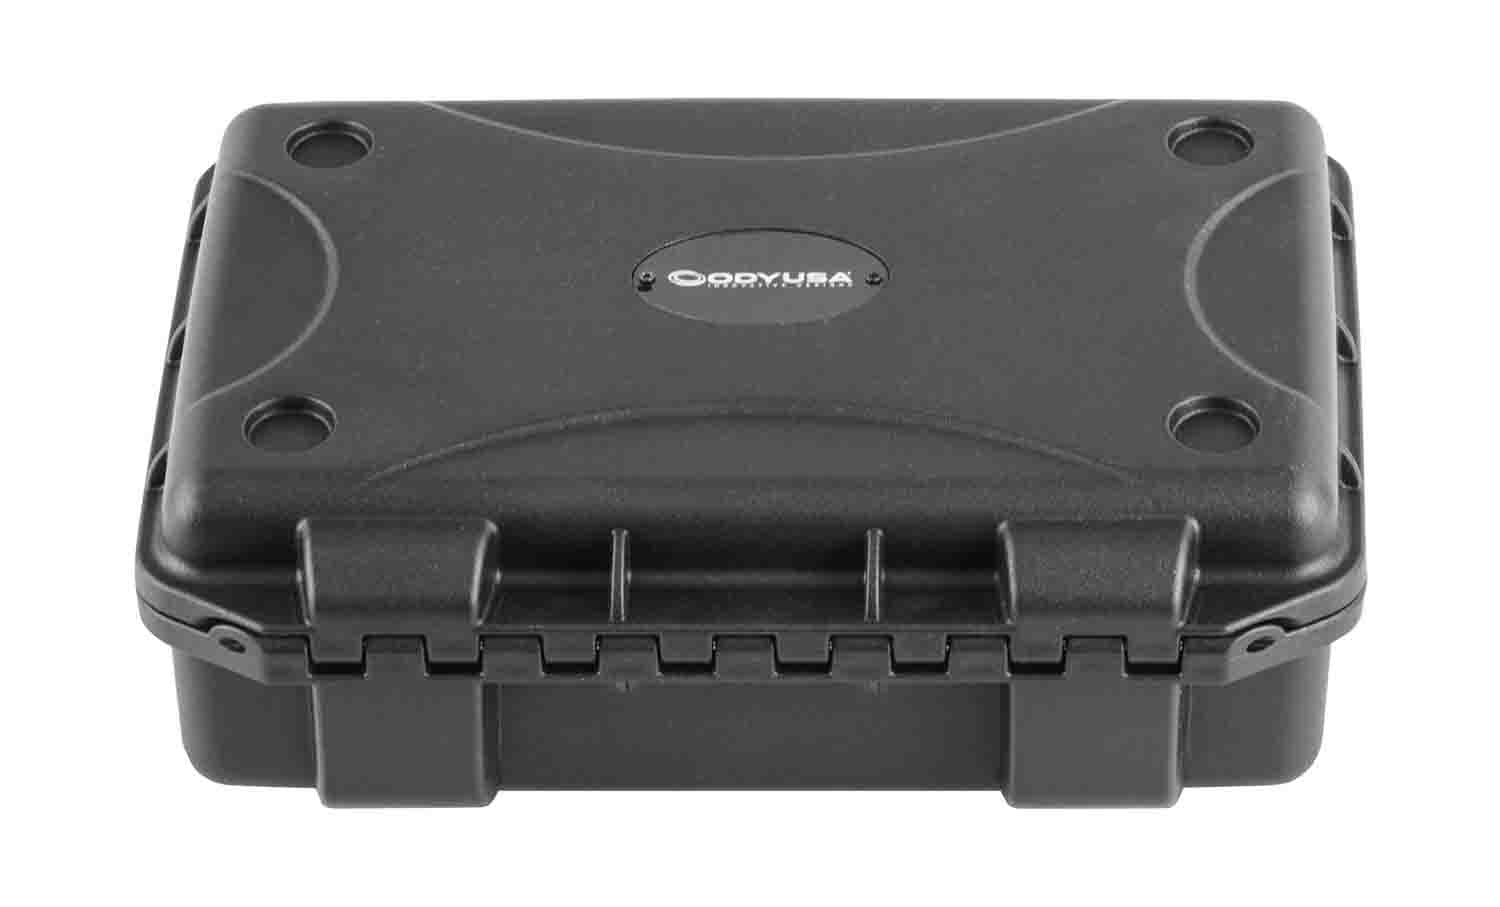 Odyssey VU100603 Vulcan Injection-Molded Utility Case with Pluck Foam - 10.75 x 6.5 x 2.25-Inch Interior - Hollywood DJ